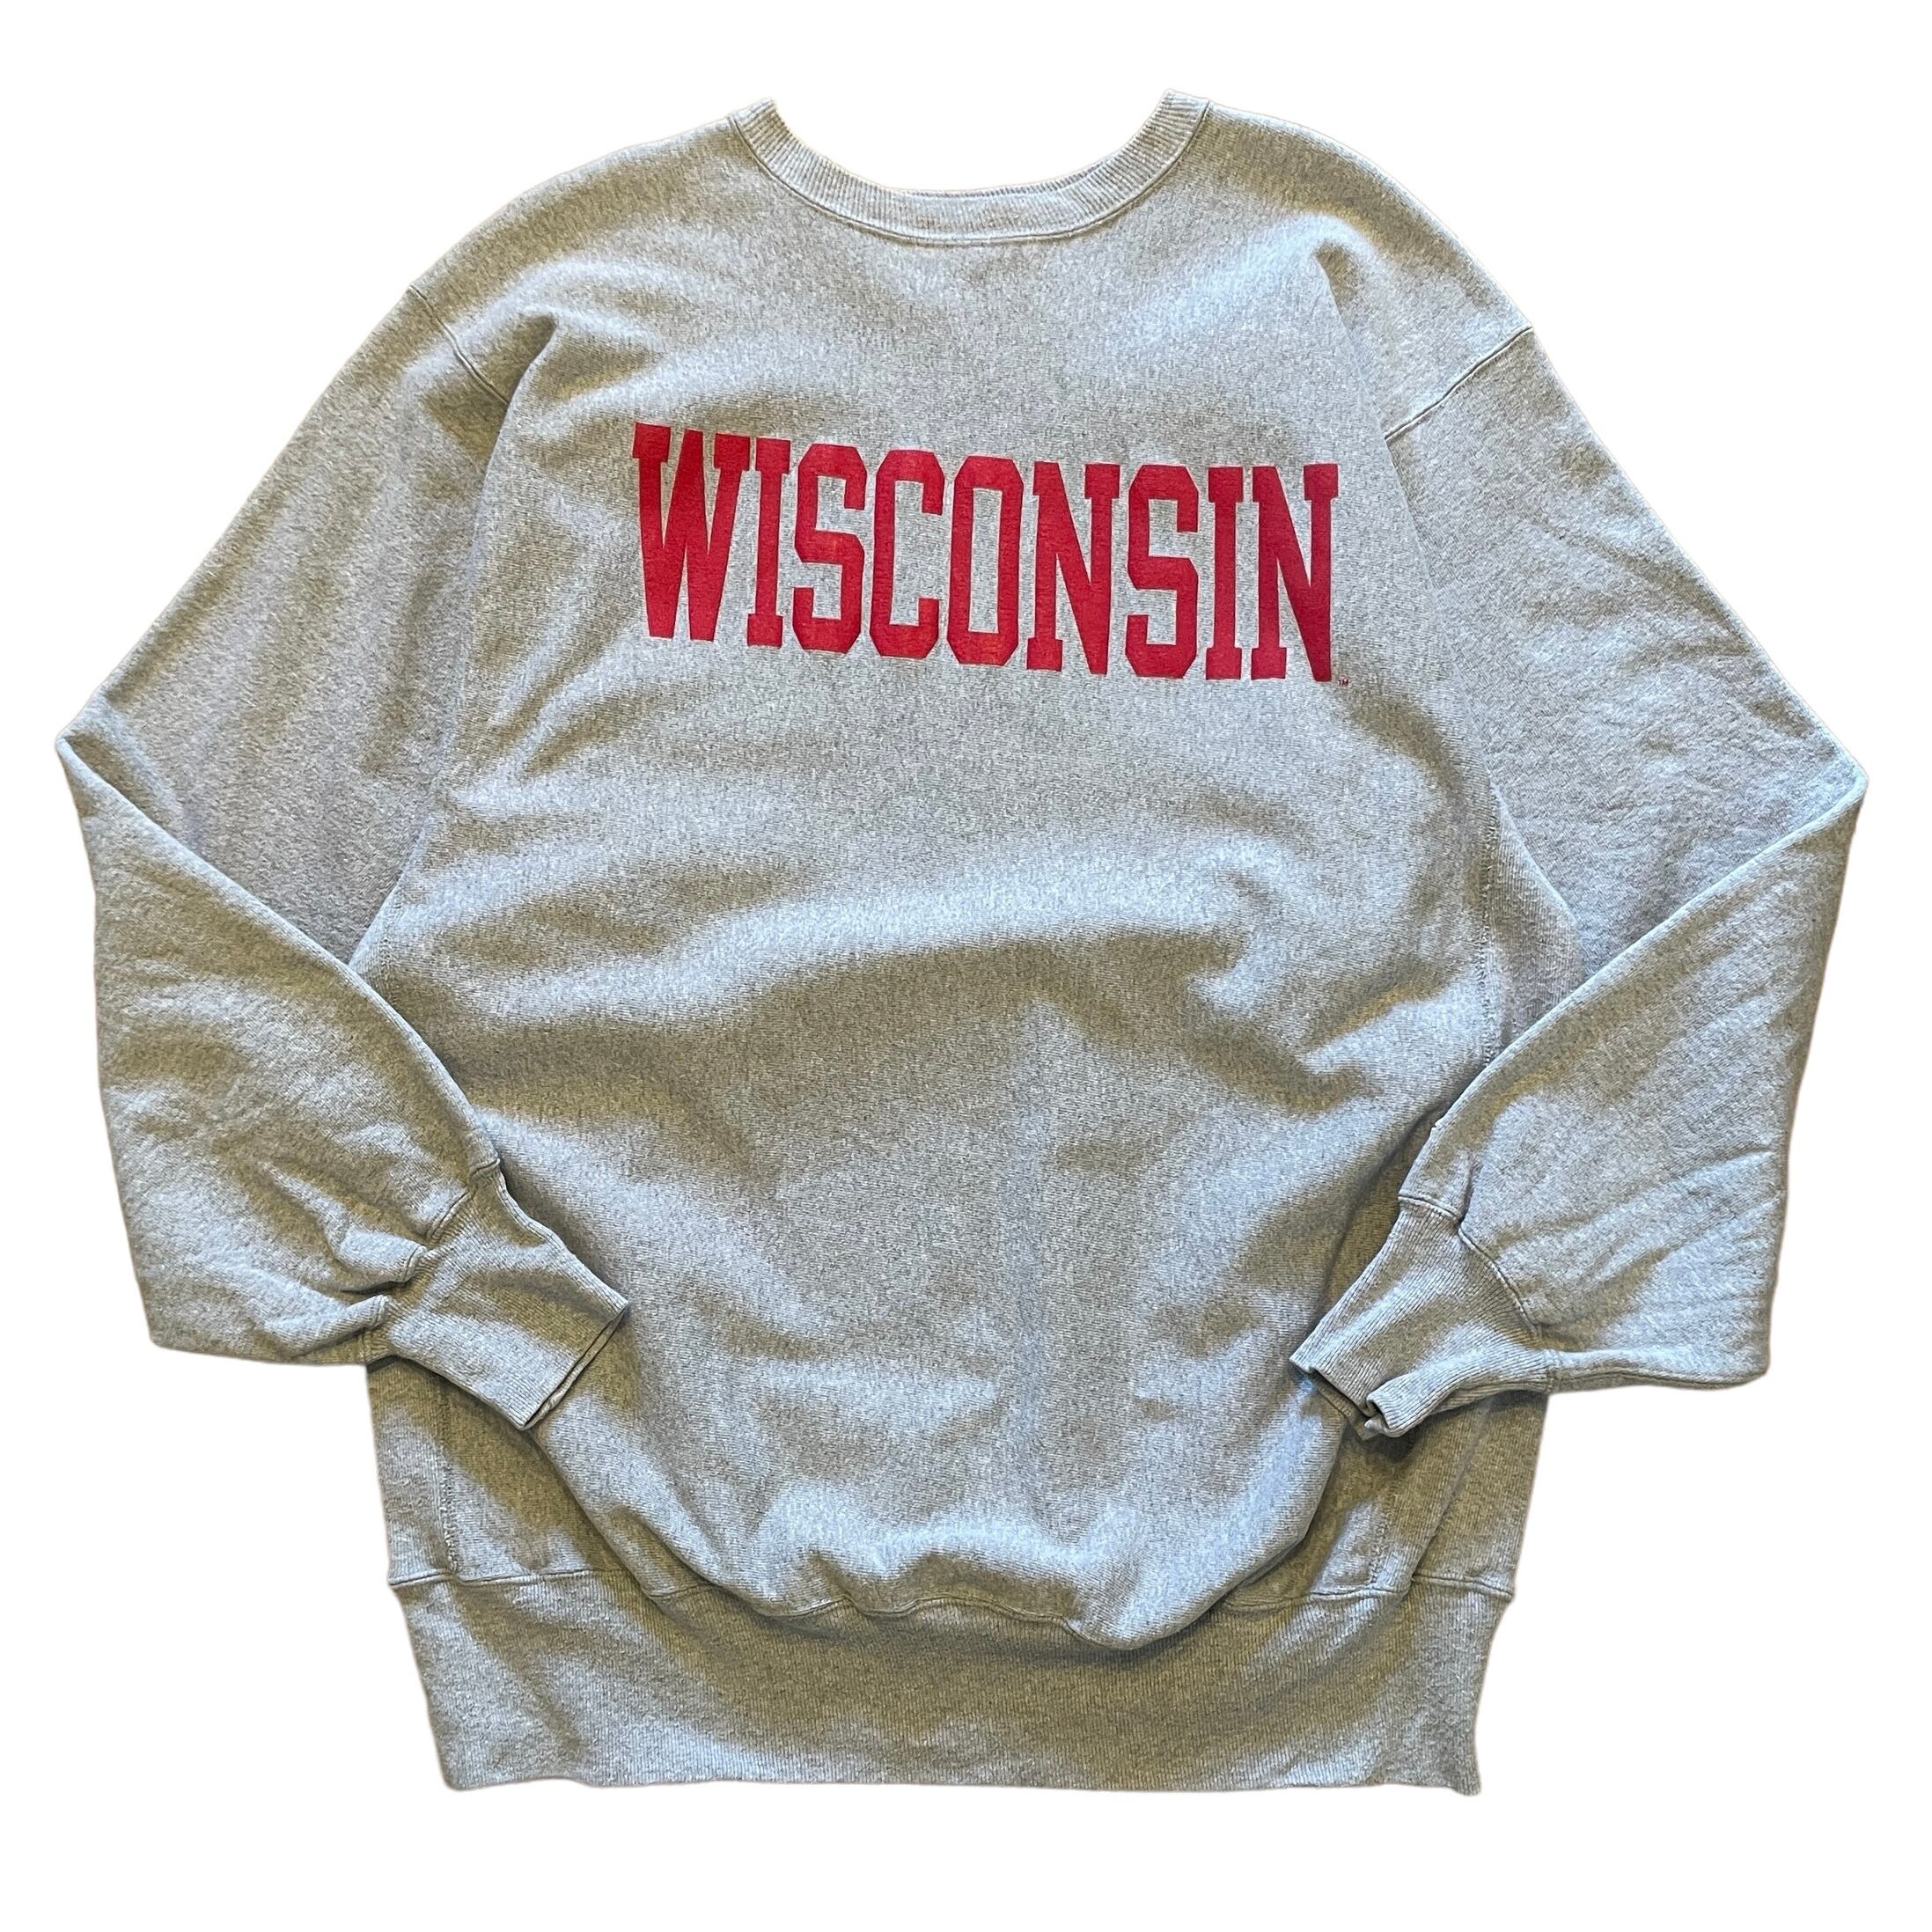 90's Champion Reverse weave Wisconsin made in Mexico【XXXL】0041